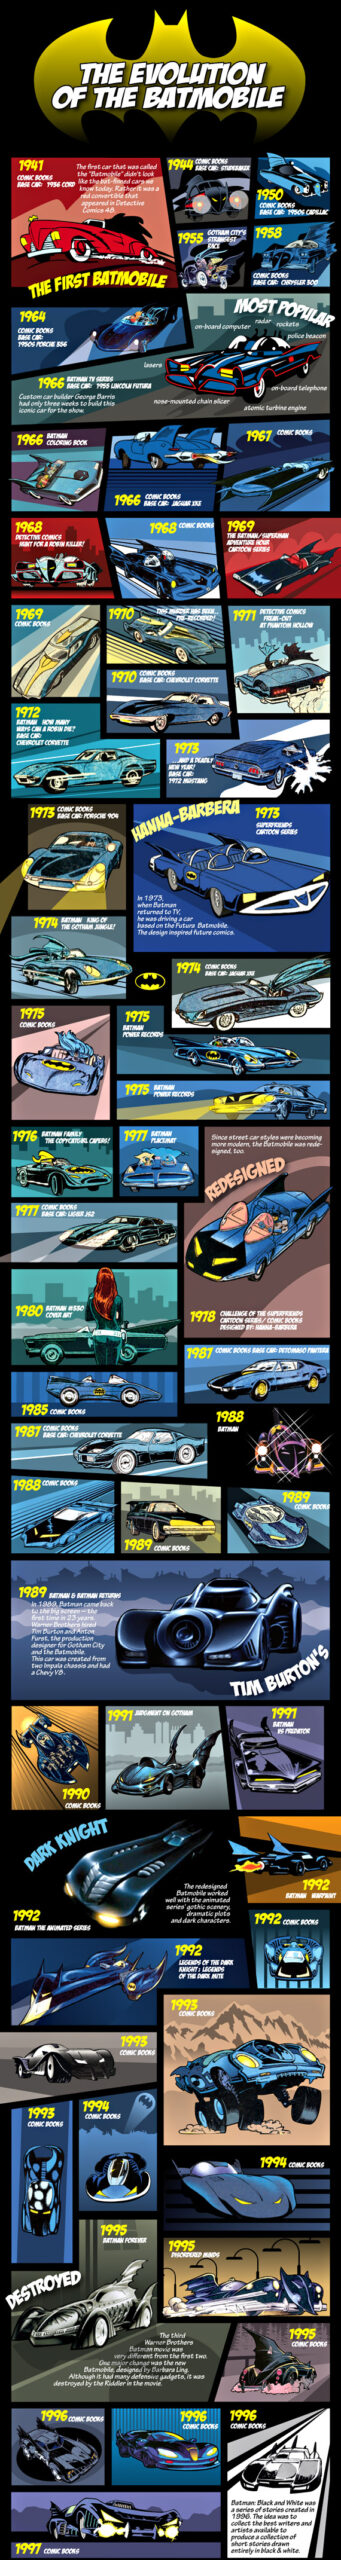 Complete History of the Batmobile: 1941-2010